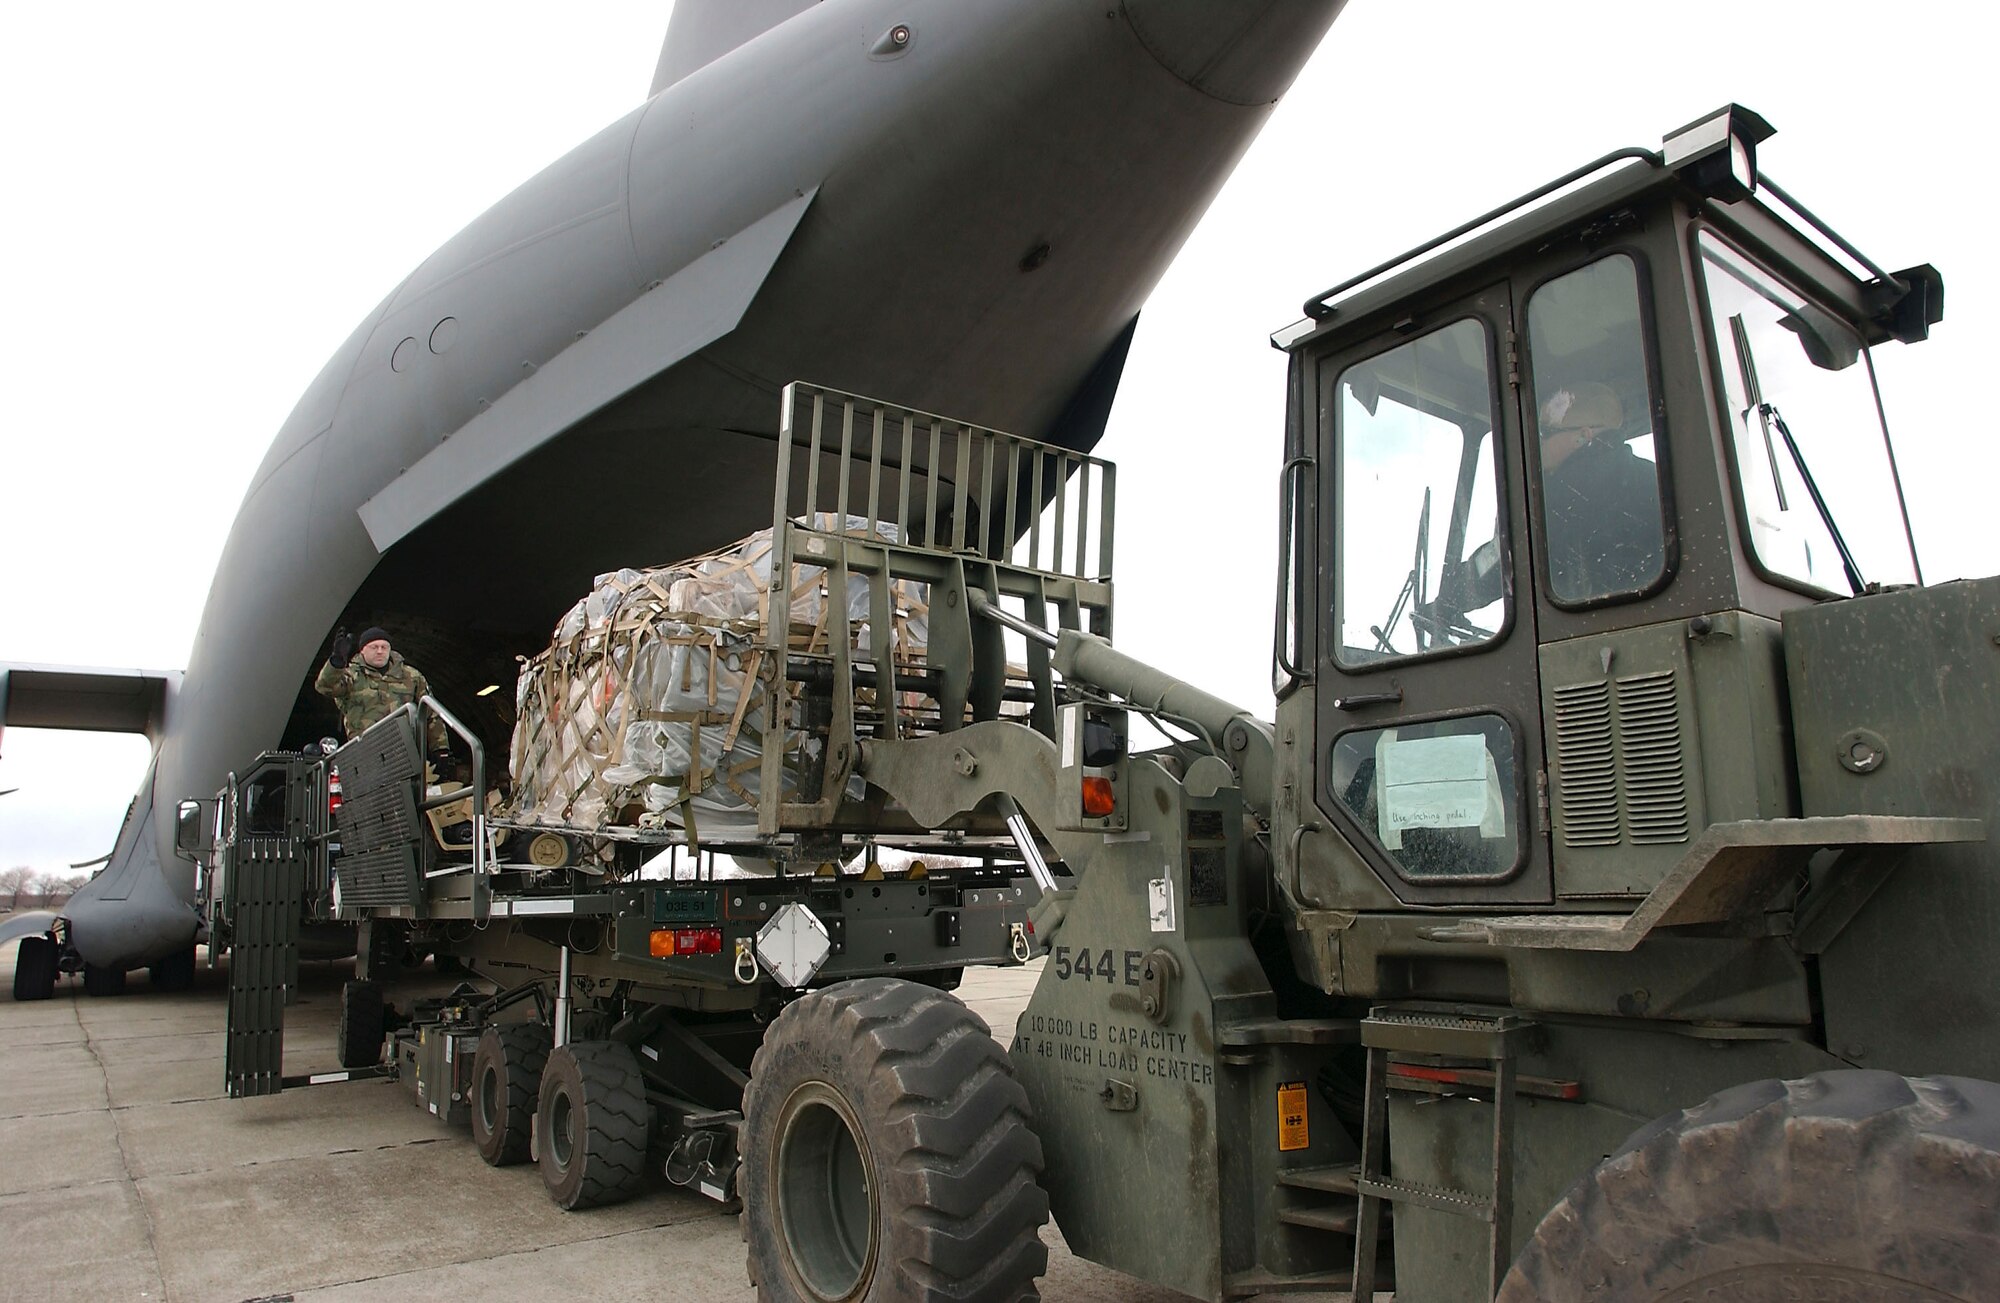 CONSTANTA, Romania - Airmen from the 349th Tanker Airlift Control Element unload a C-17 Globemaster III from McChord Air Force Base, Wash. This base in Romania is a key link in the air bridge supporting Operation Iraqi Freedom. (U.S. Air Force photo by Master Sgt. Keith Reed)                      